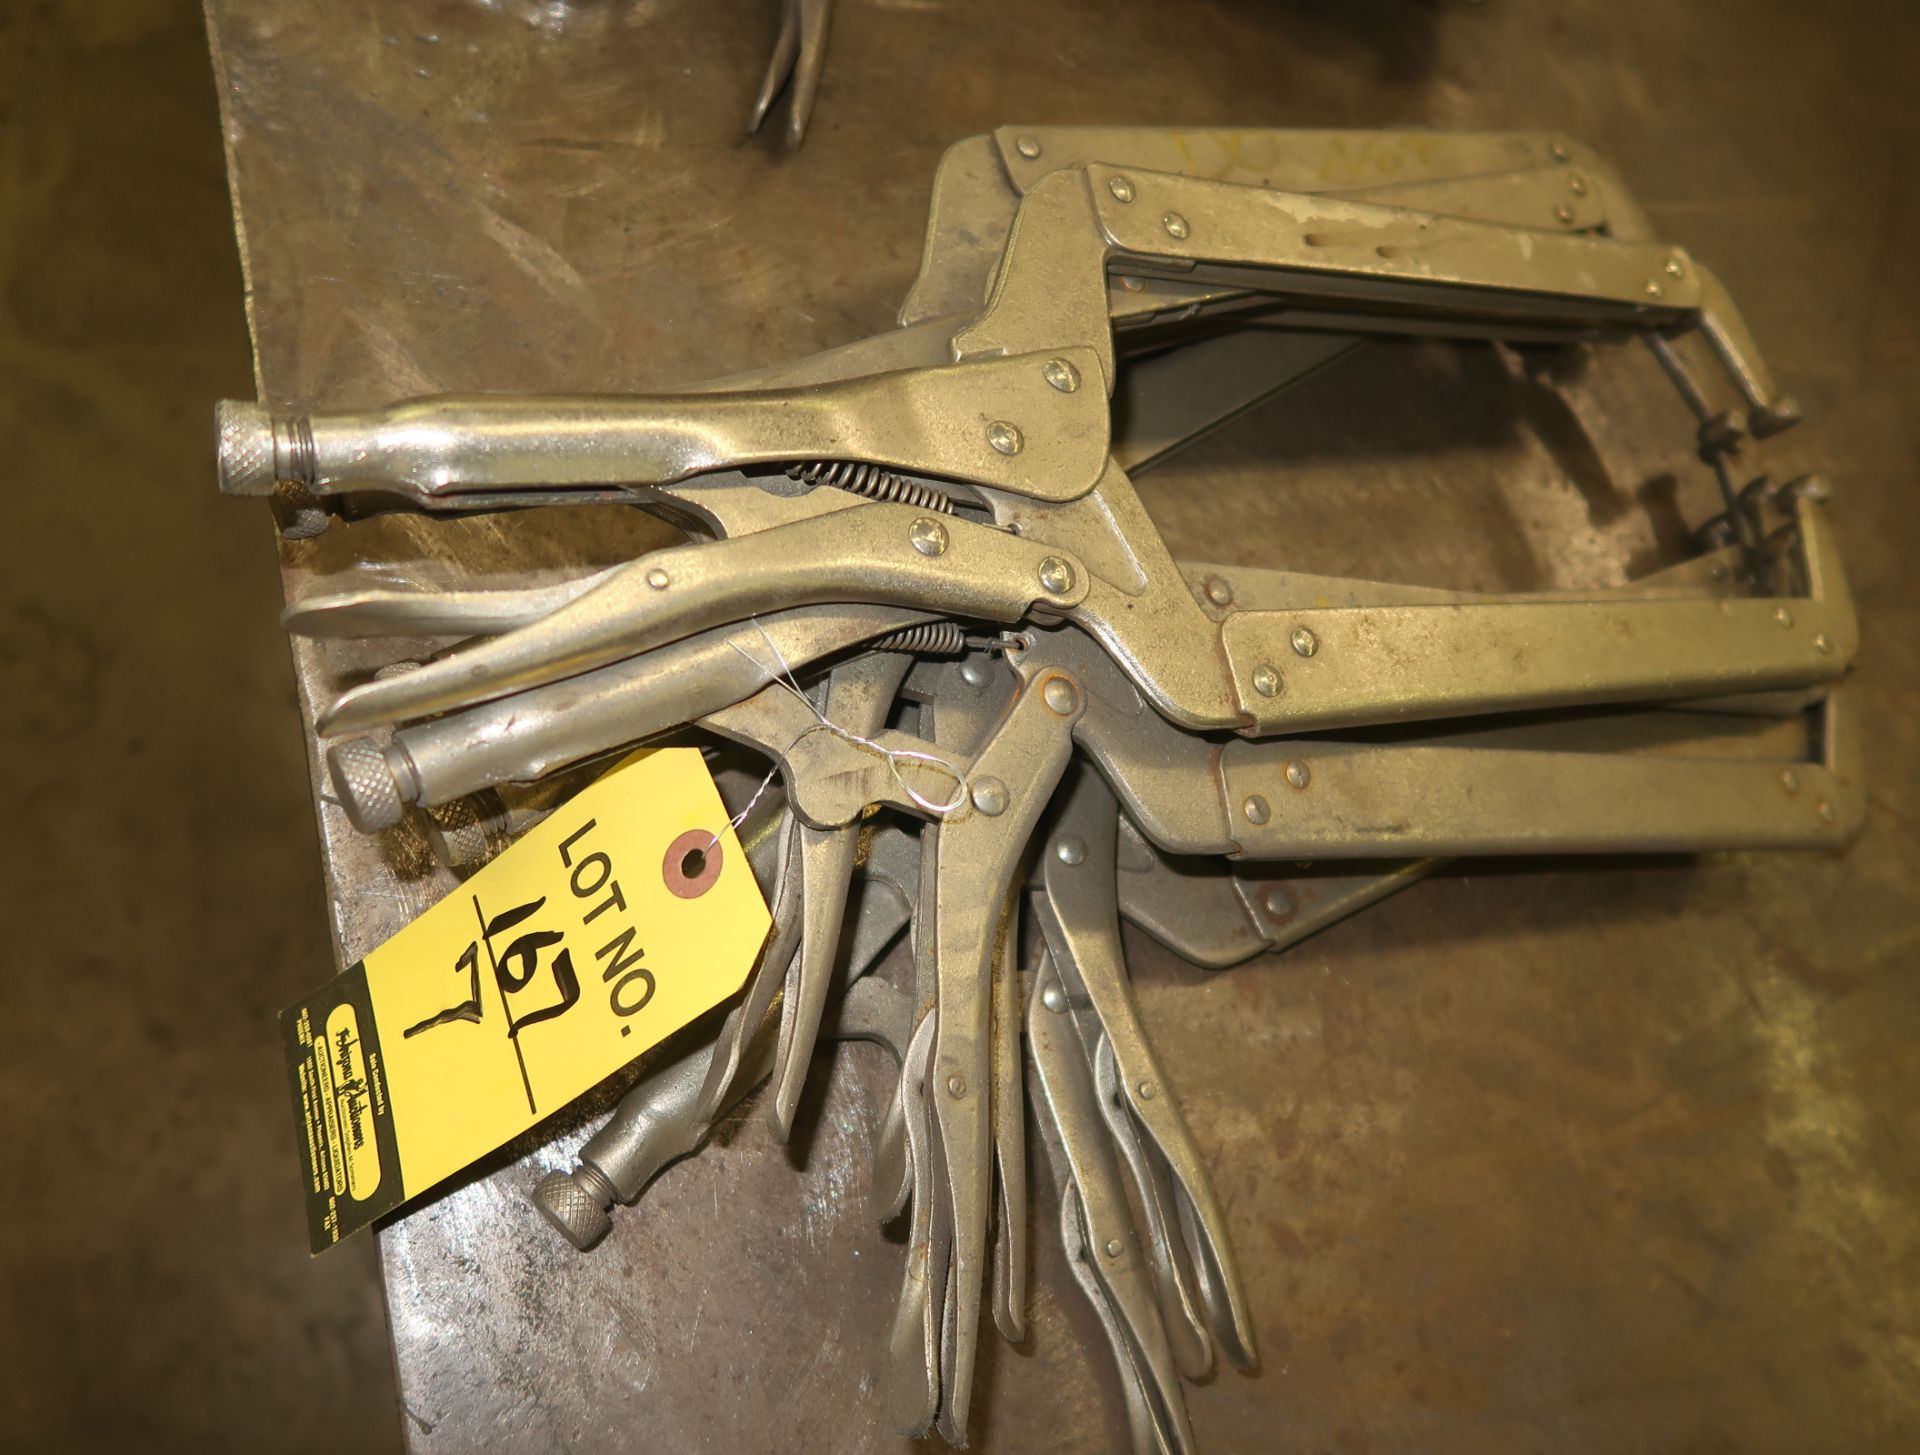 DEEP VISE CLAMPS